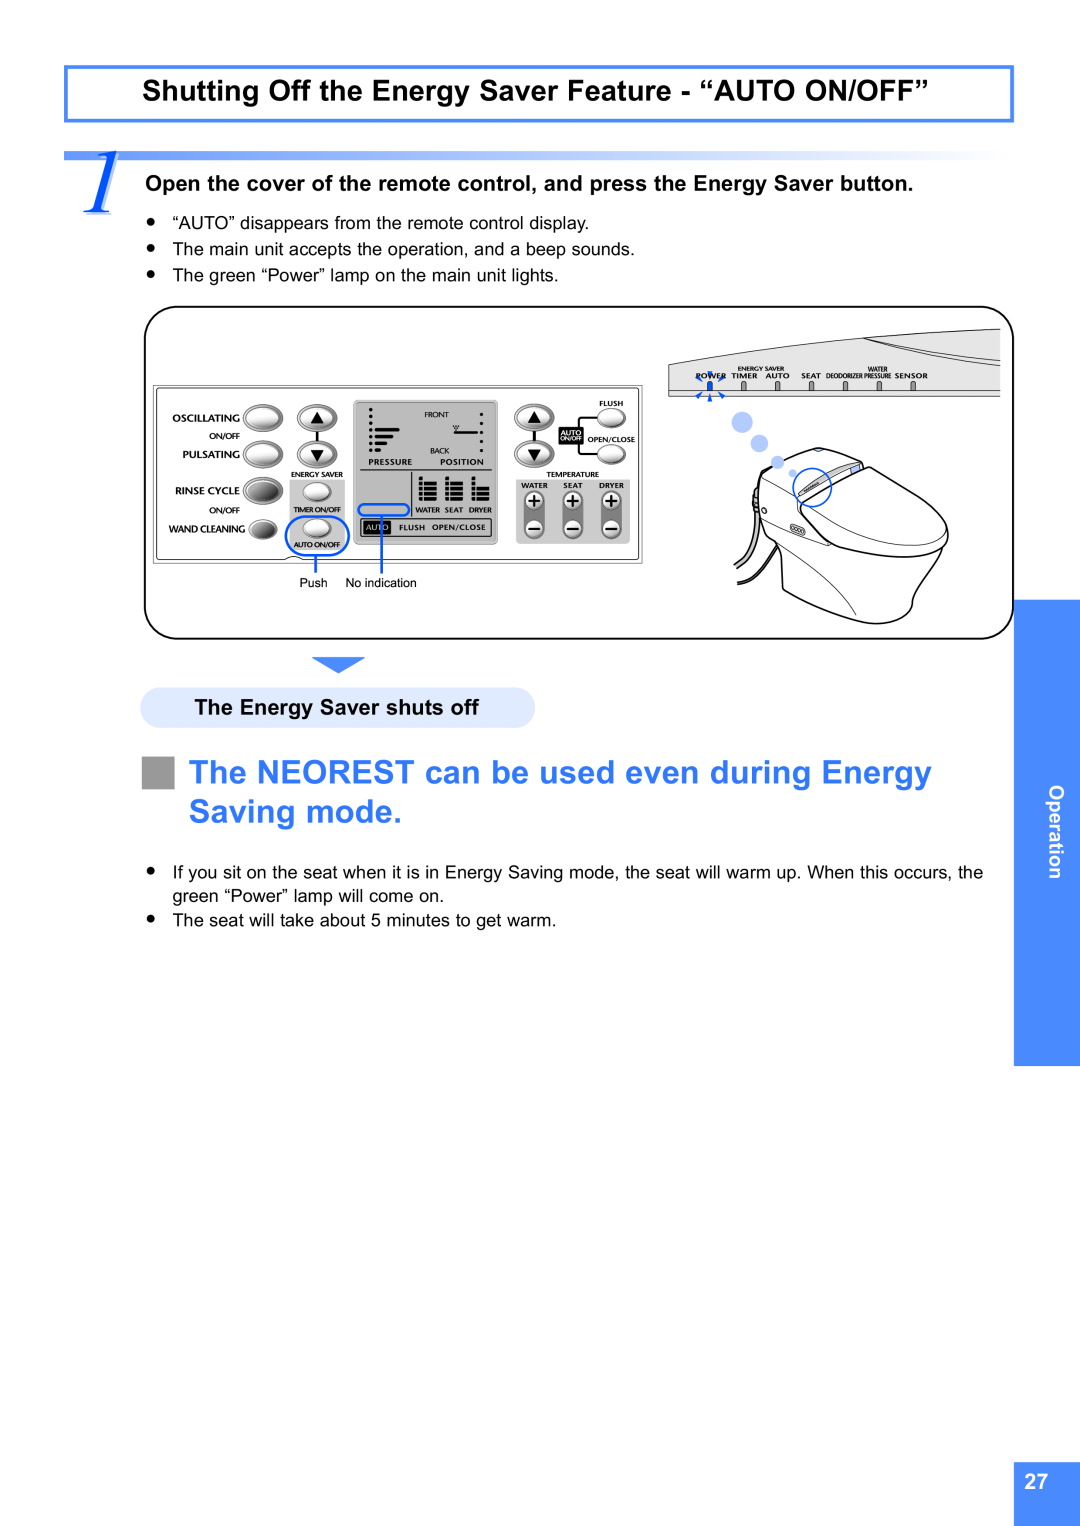 Toto MS990CG instruction manual PushNoindication, The Energy Saver shuts off, Operation 